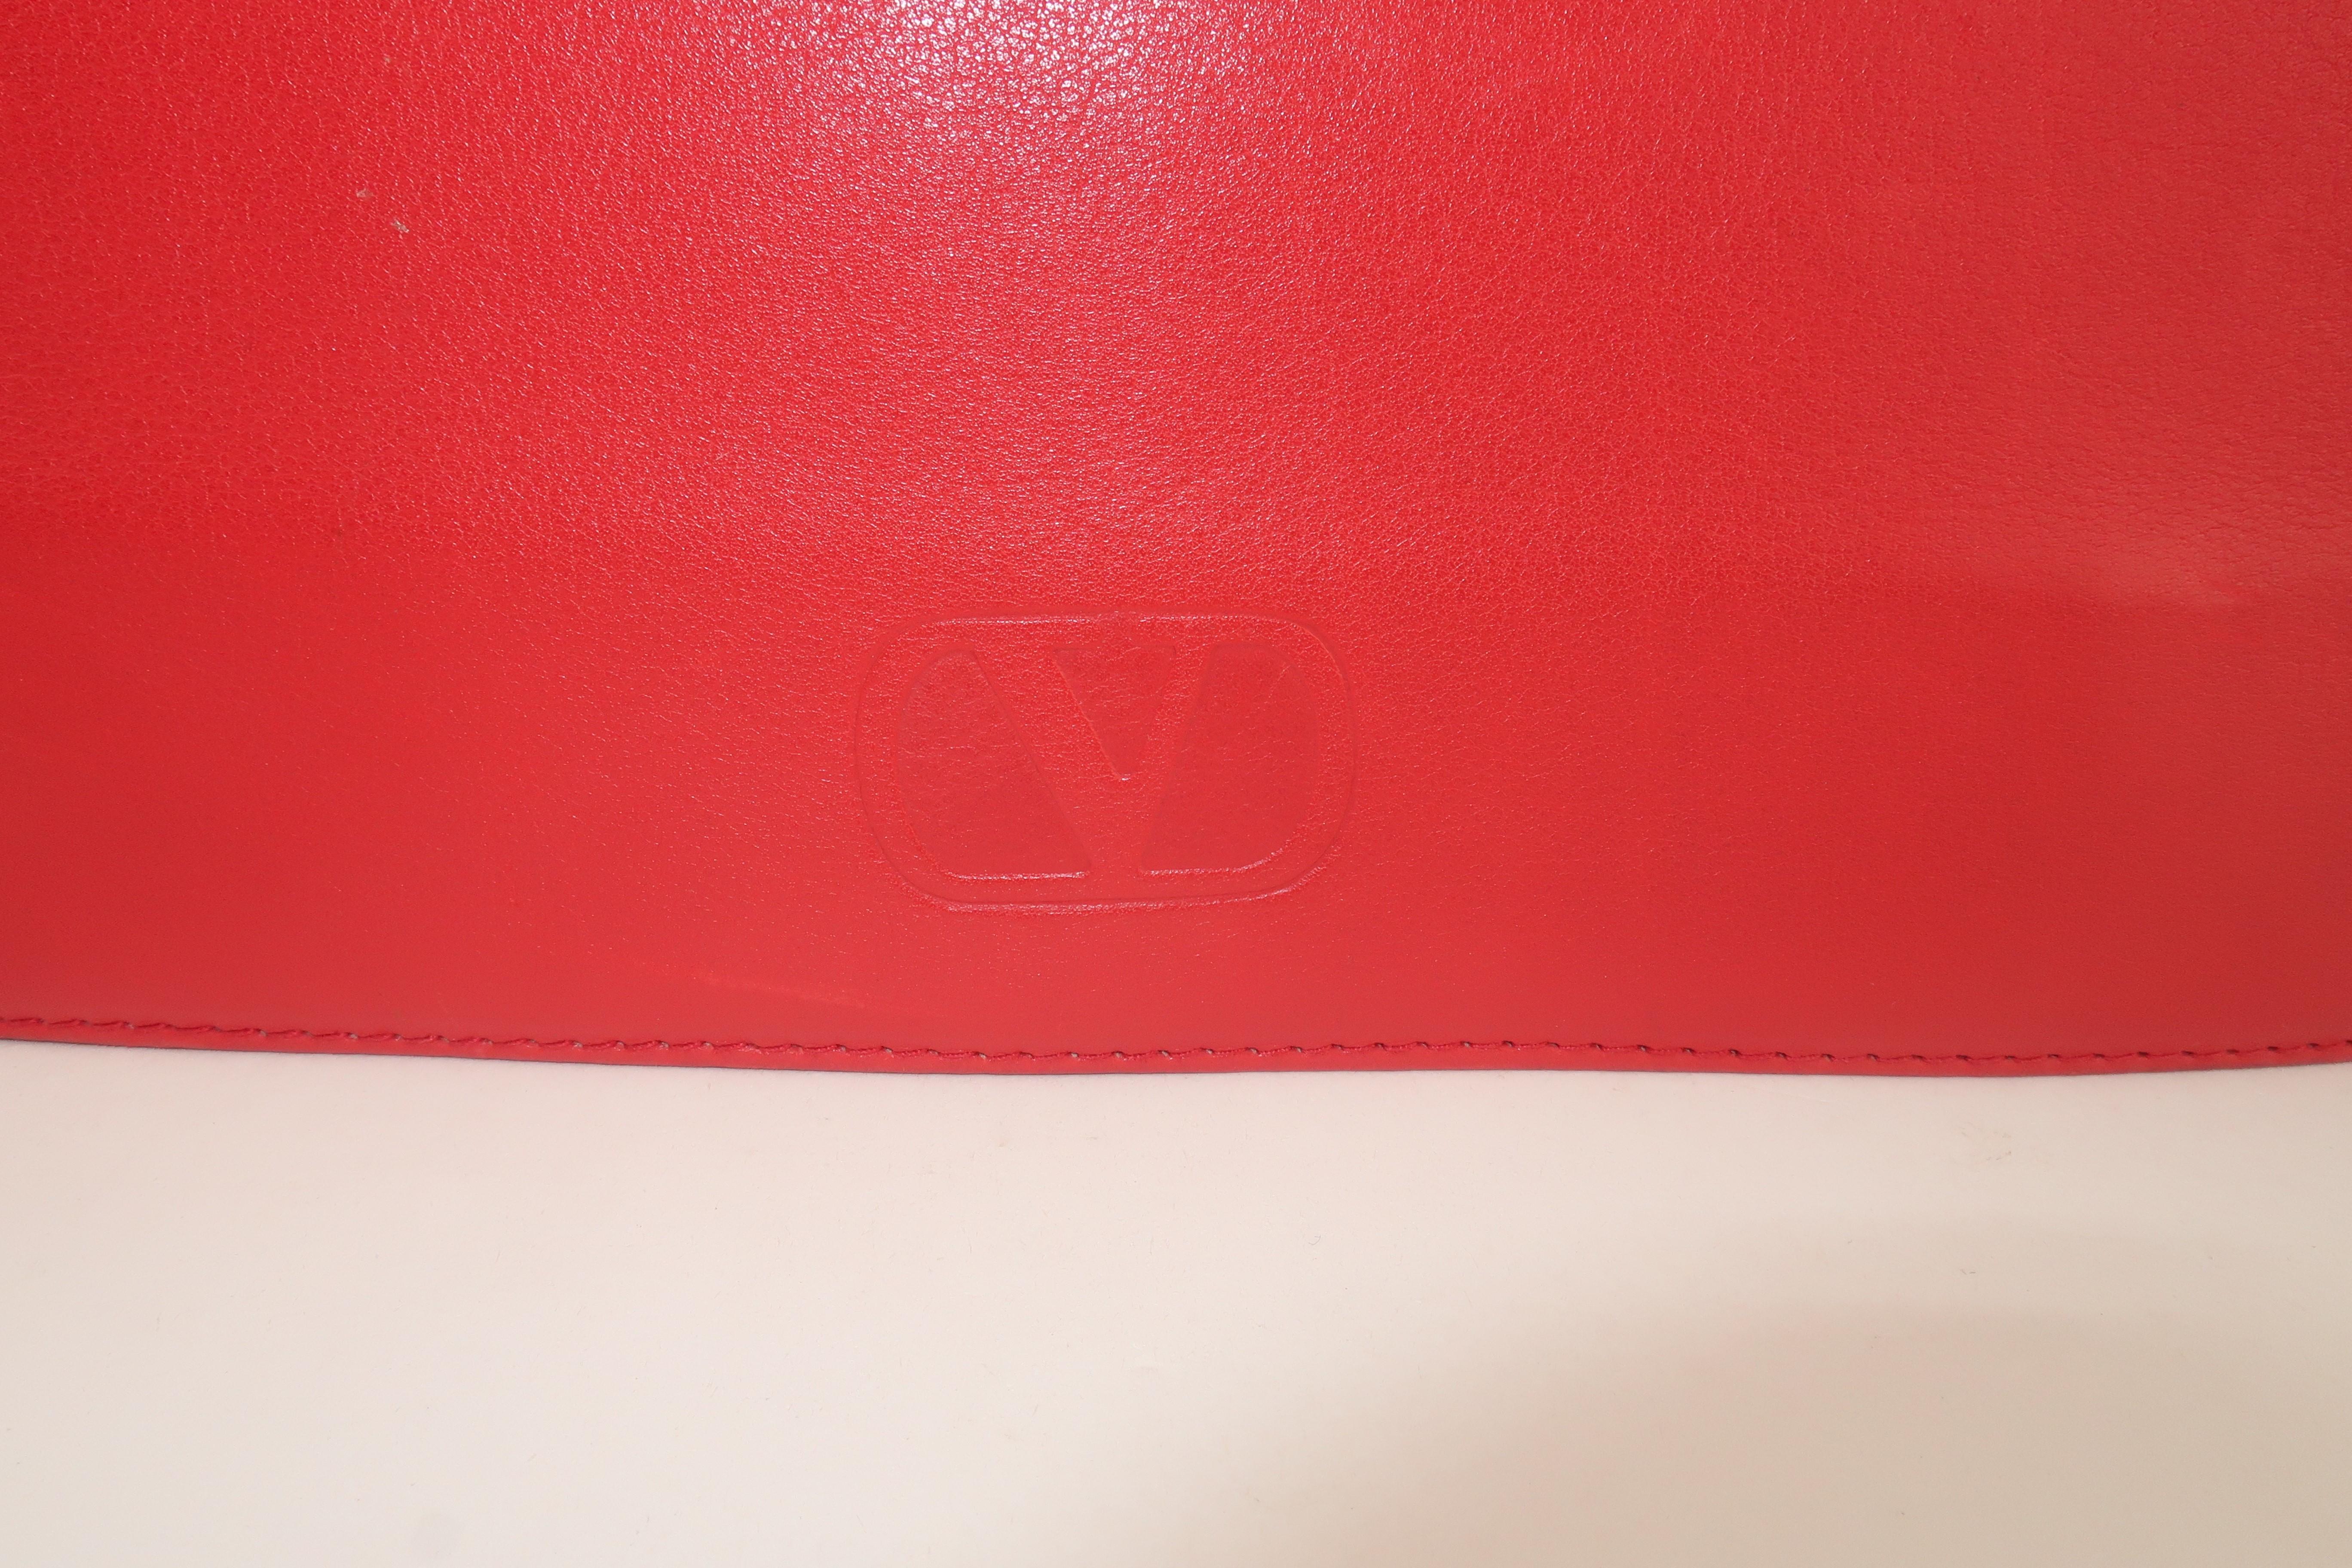 Women's Valentino Red Leather Handbag With Spiral Hardware, 1980’s